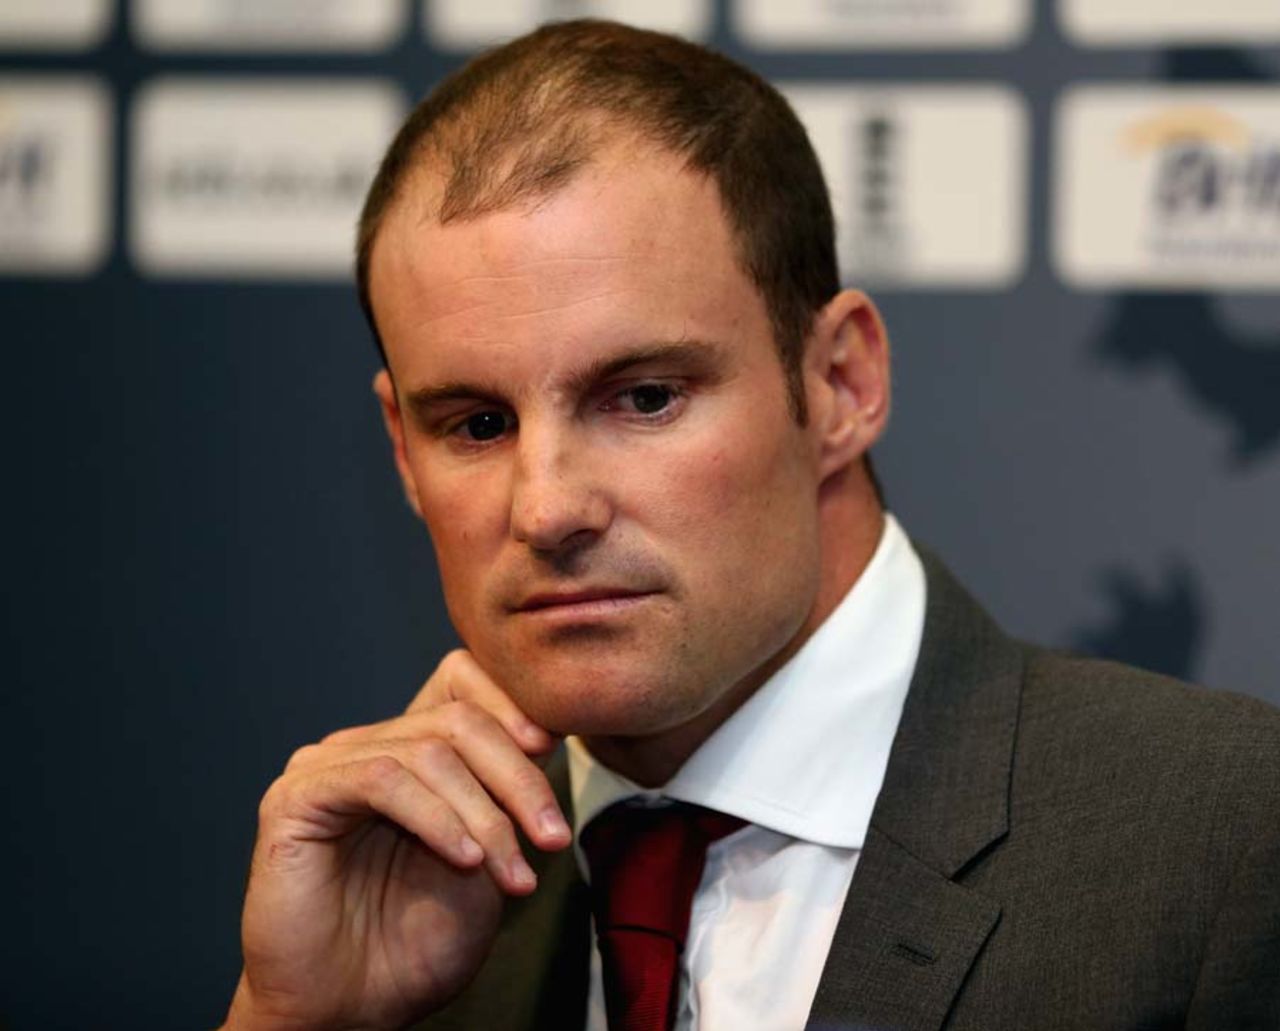 Andrew Strauss announces his retirement in a press conference at Lord's, London, August 29, 2012